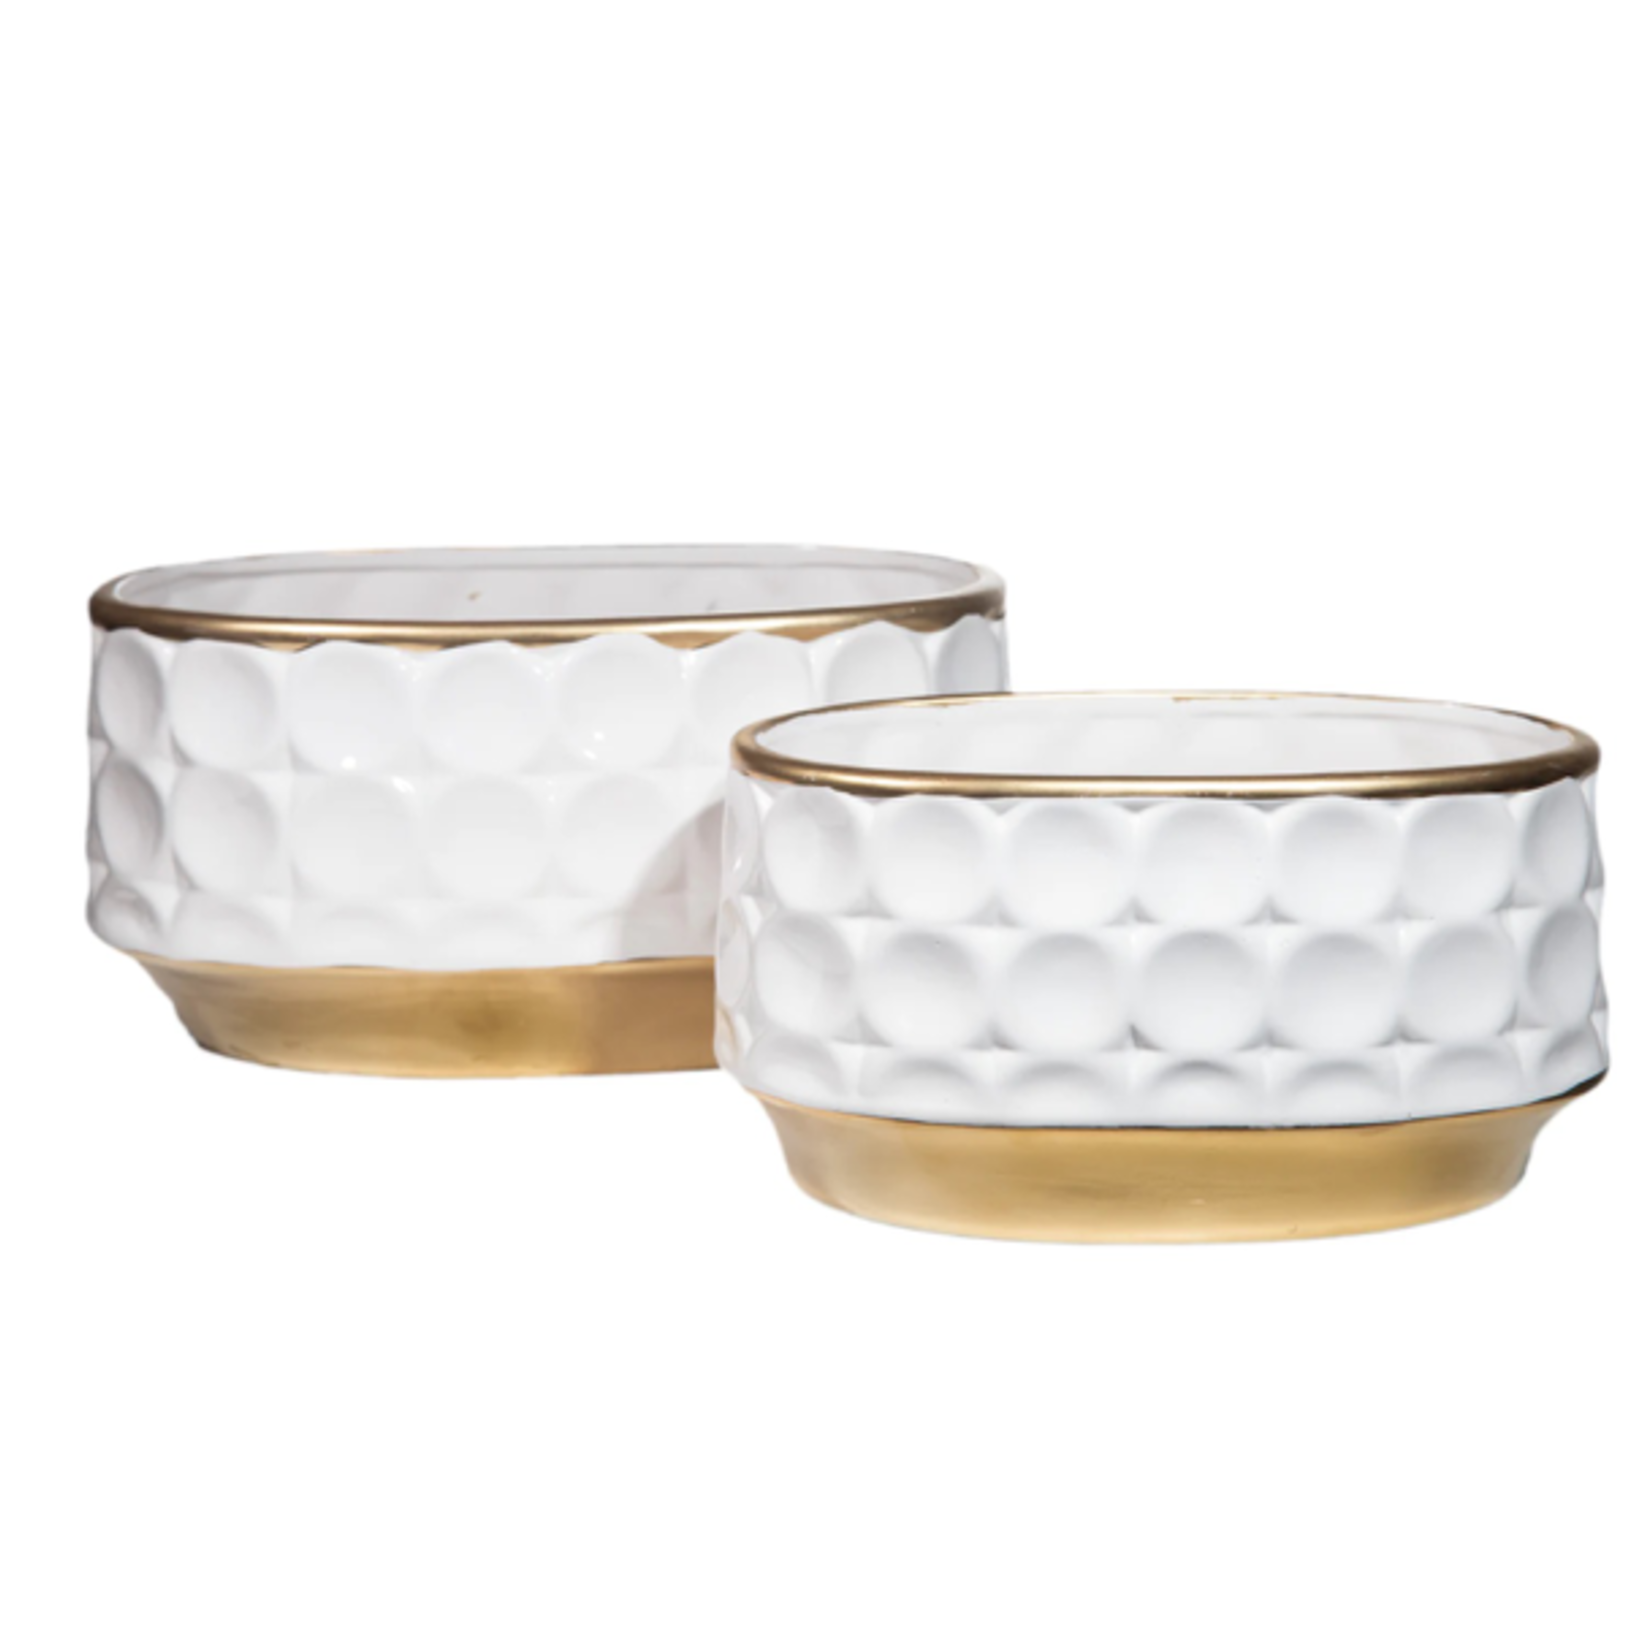 6.5”H X 13.5” X 8.5”W LARGE MATTE WHITE CERAMIC WITH GOLD OVAL POT DOTTED